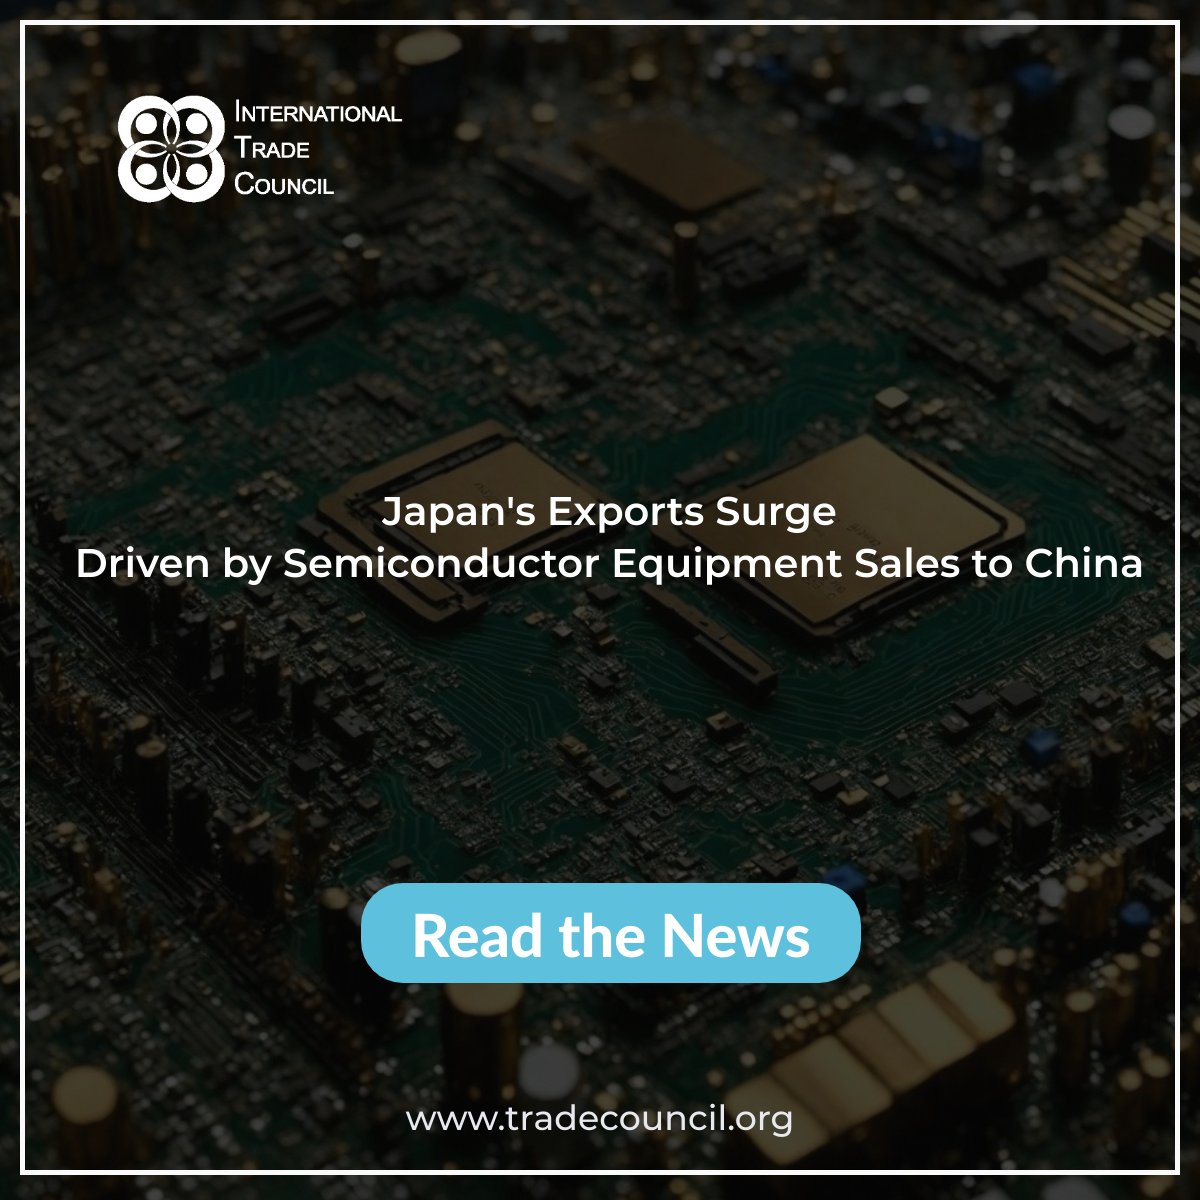 Japan's Exports Surge Driven by Semiconductor Equipment Sales to China
Read The News: tradecouncil.org/japans-exports…
#ITCNewsUpdates #Breakingnews #ExportGrowth #SemiconductorIndustry #JapanExports #TradeSurplus #EconomicRecovery